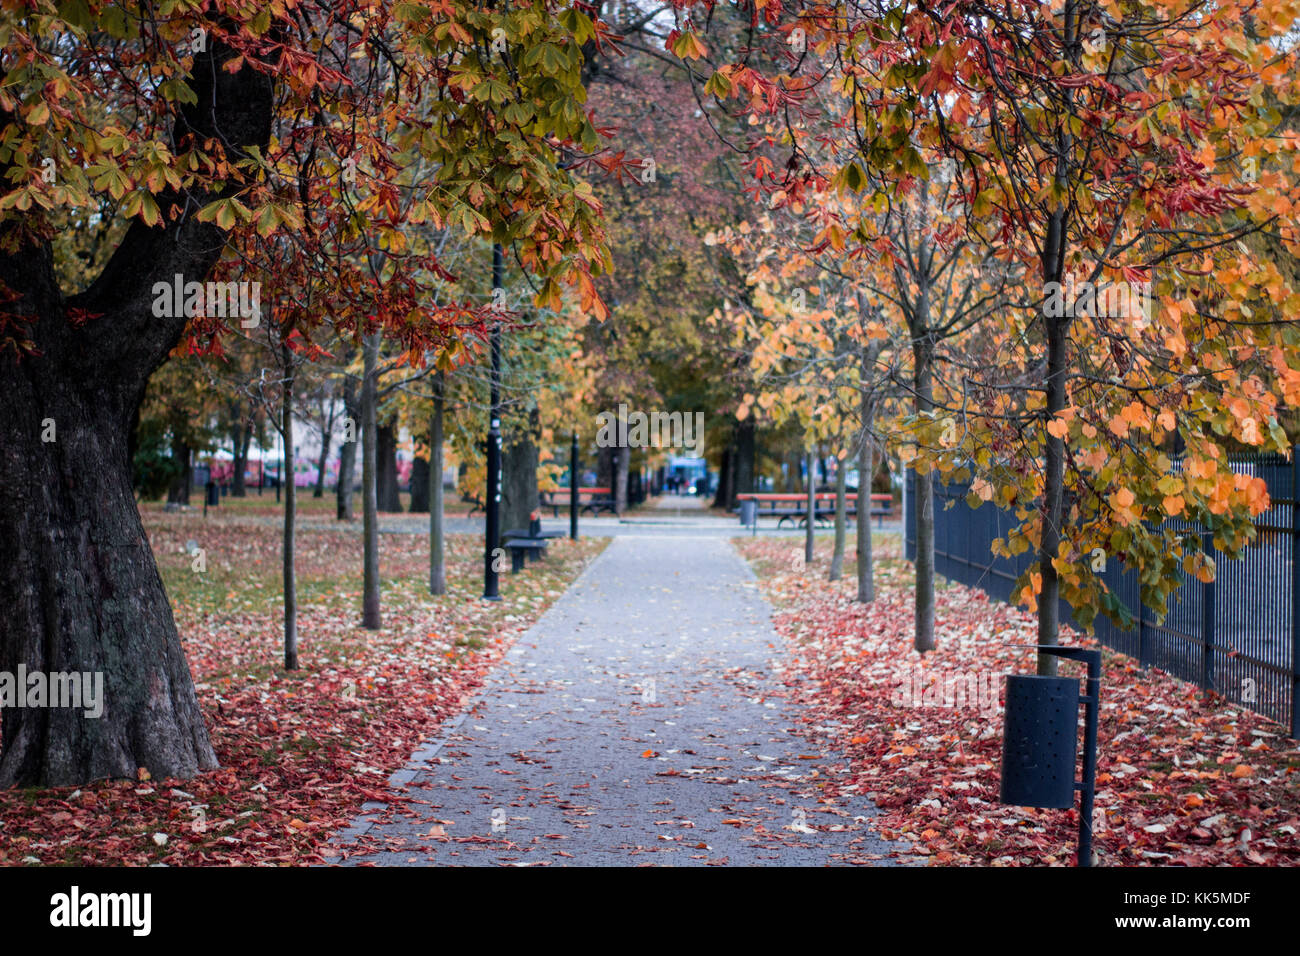 autumn scenery park peple walking at a park with leaves on the ground and white building Stock Photo